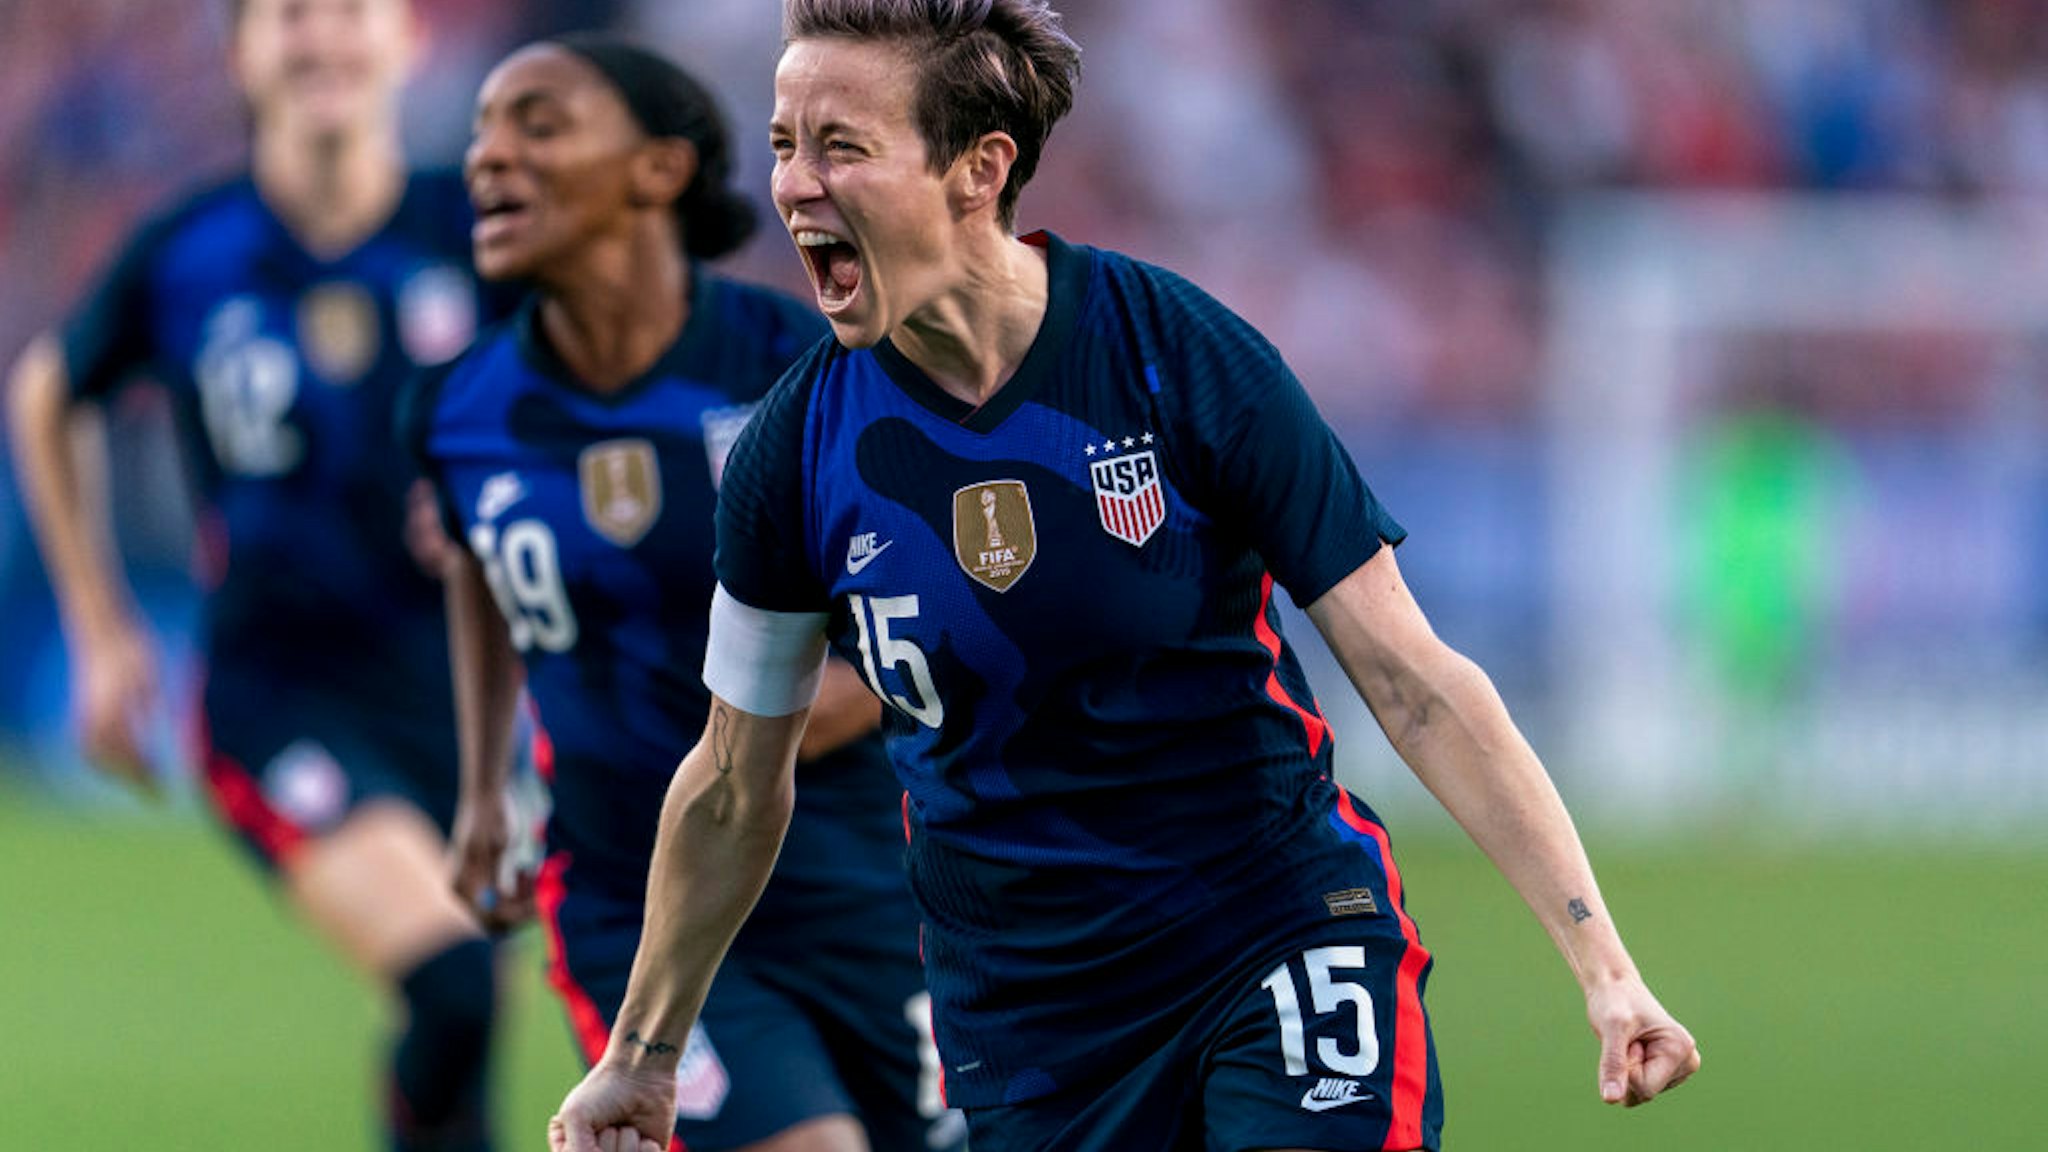 Megan Rapinoe #15 of the United States celebrates during a game between Japan and USWNT at Toyota Stadium on March 11, 2020 in Frisco, Texas.